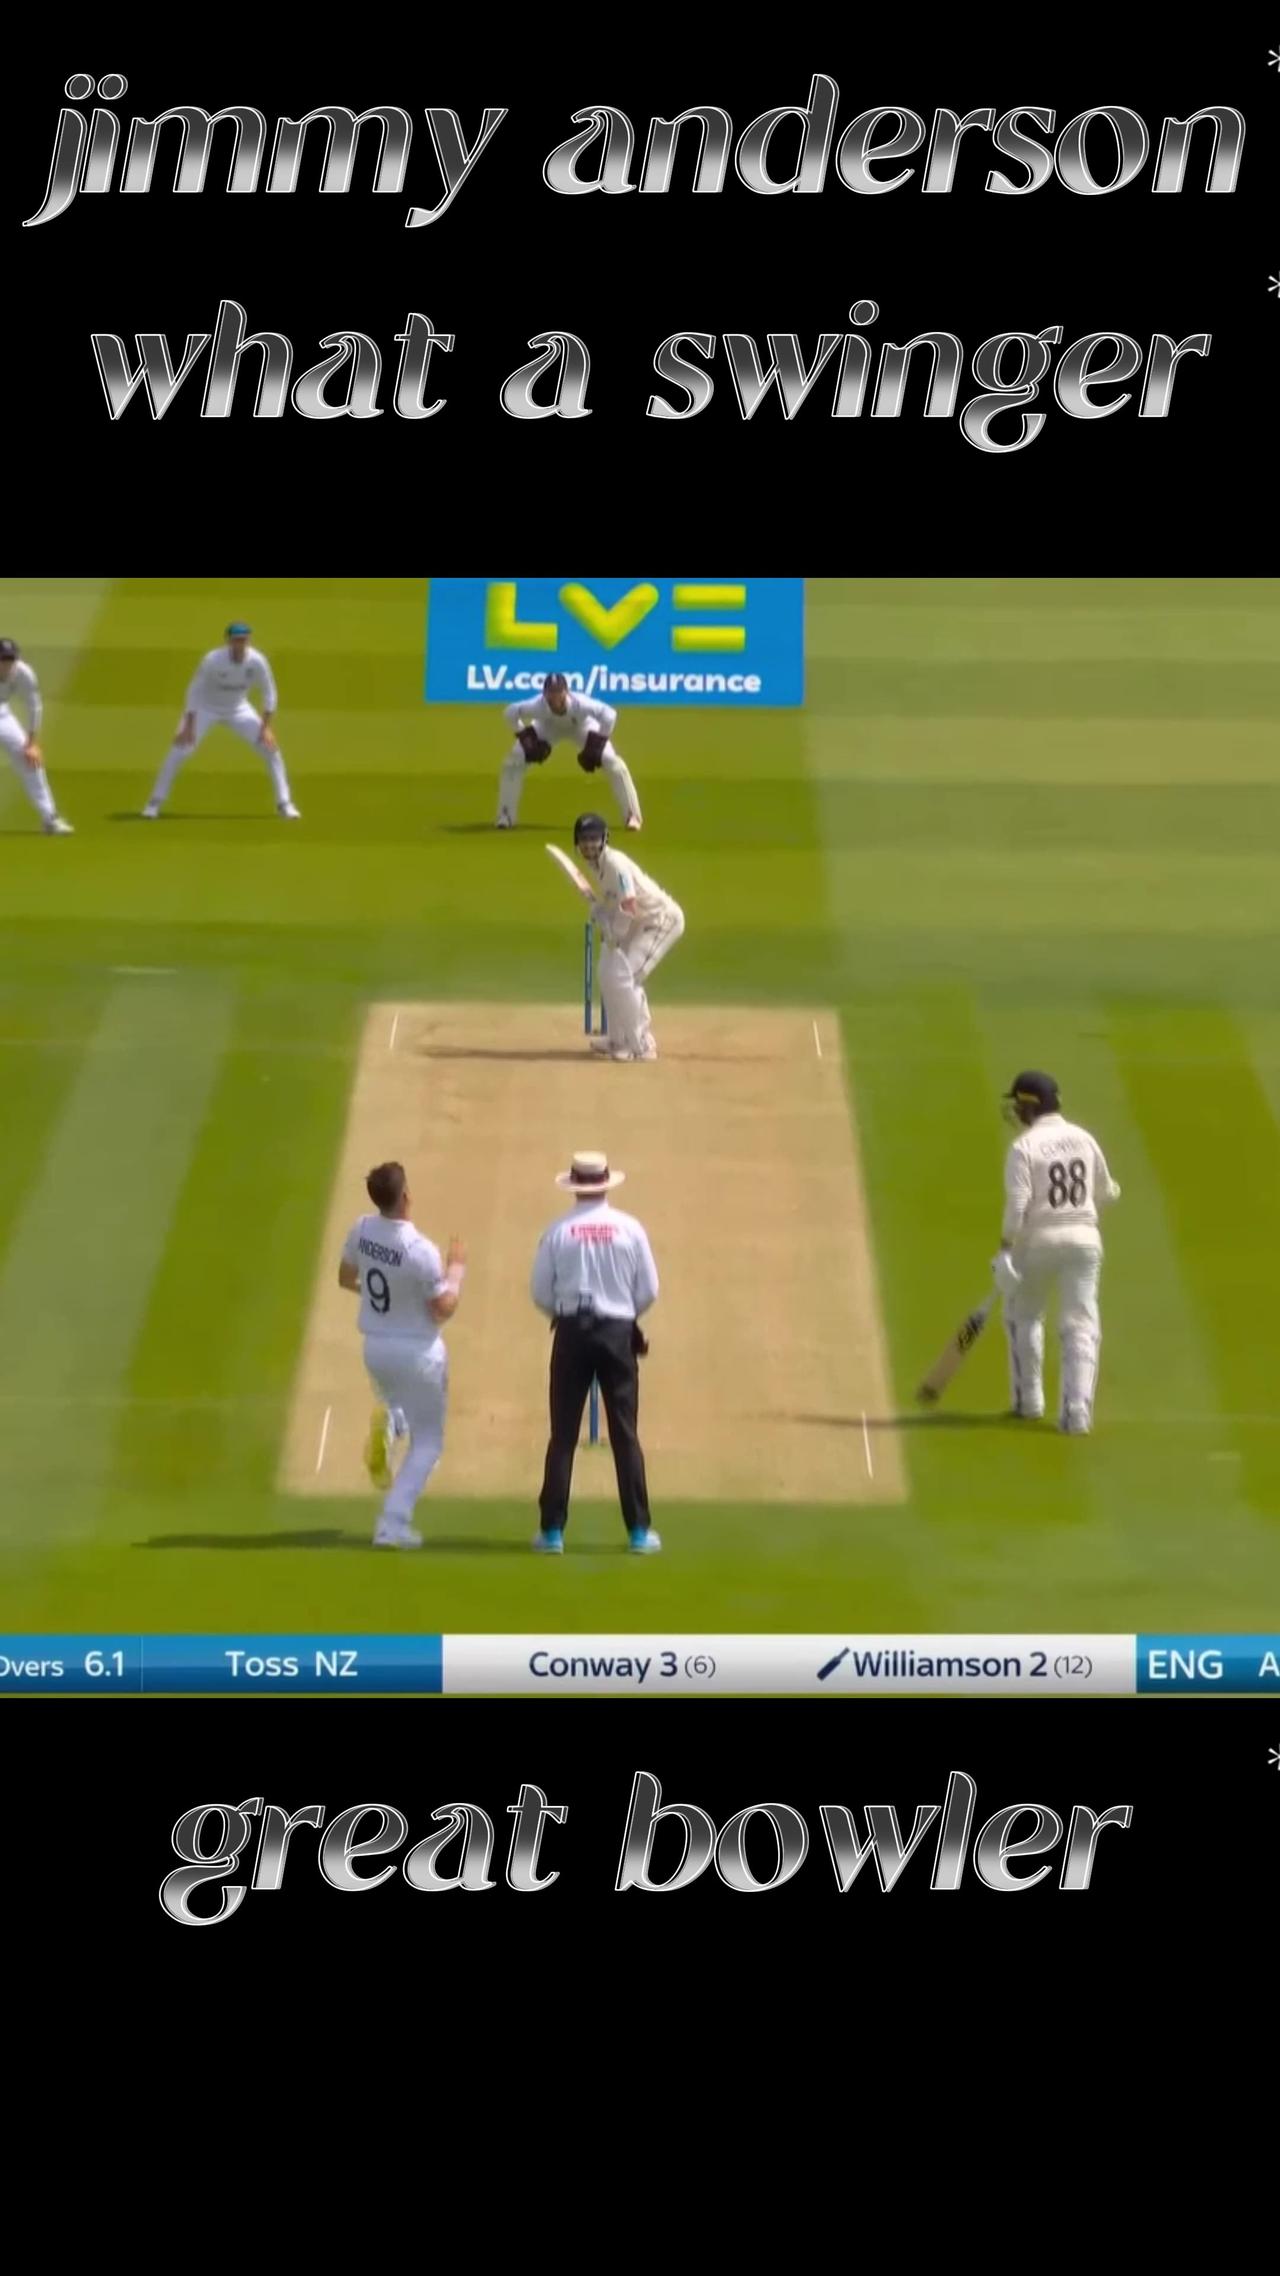 "james anderson great bowling against newzealand"#foryoupage #trending #jamesanderson #england